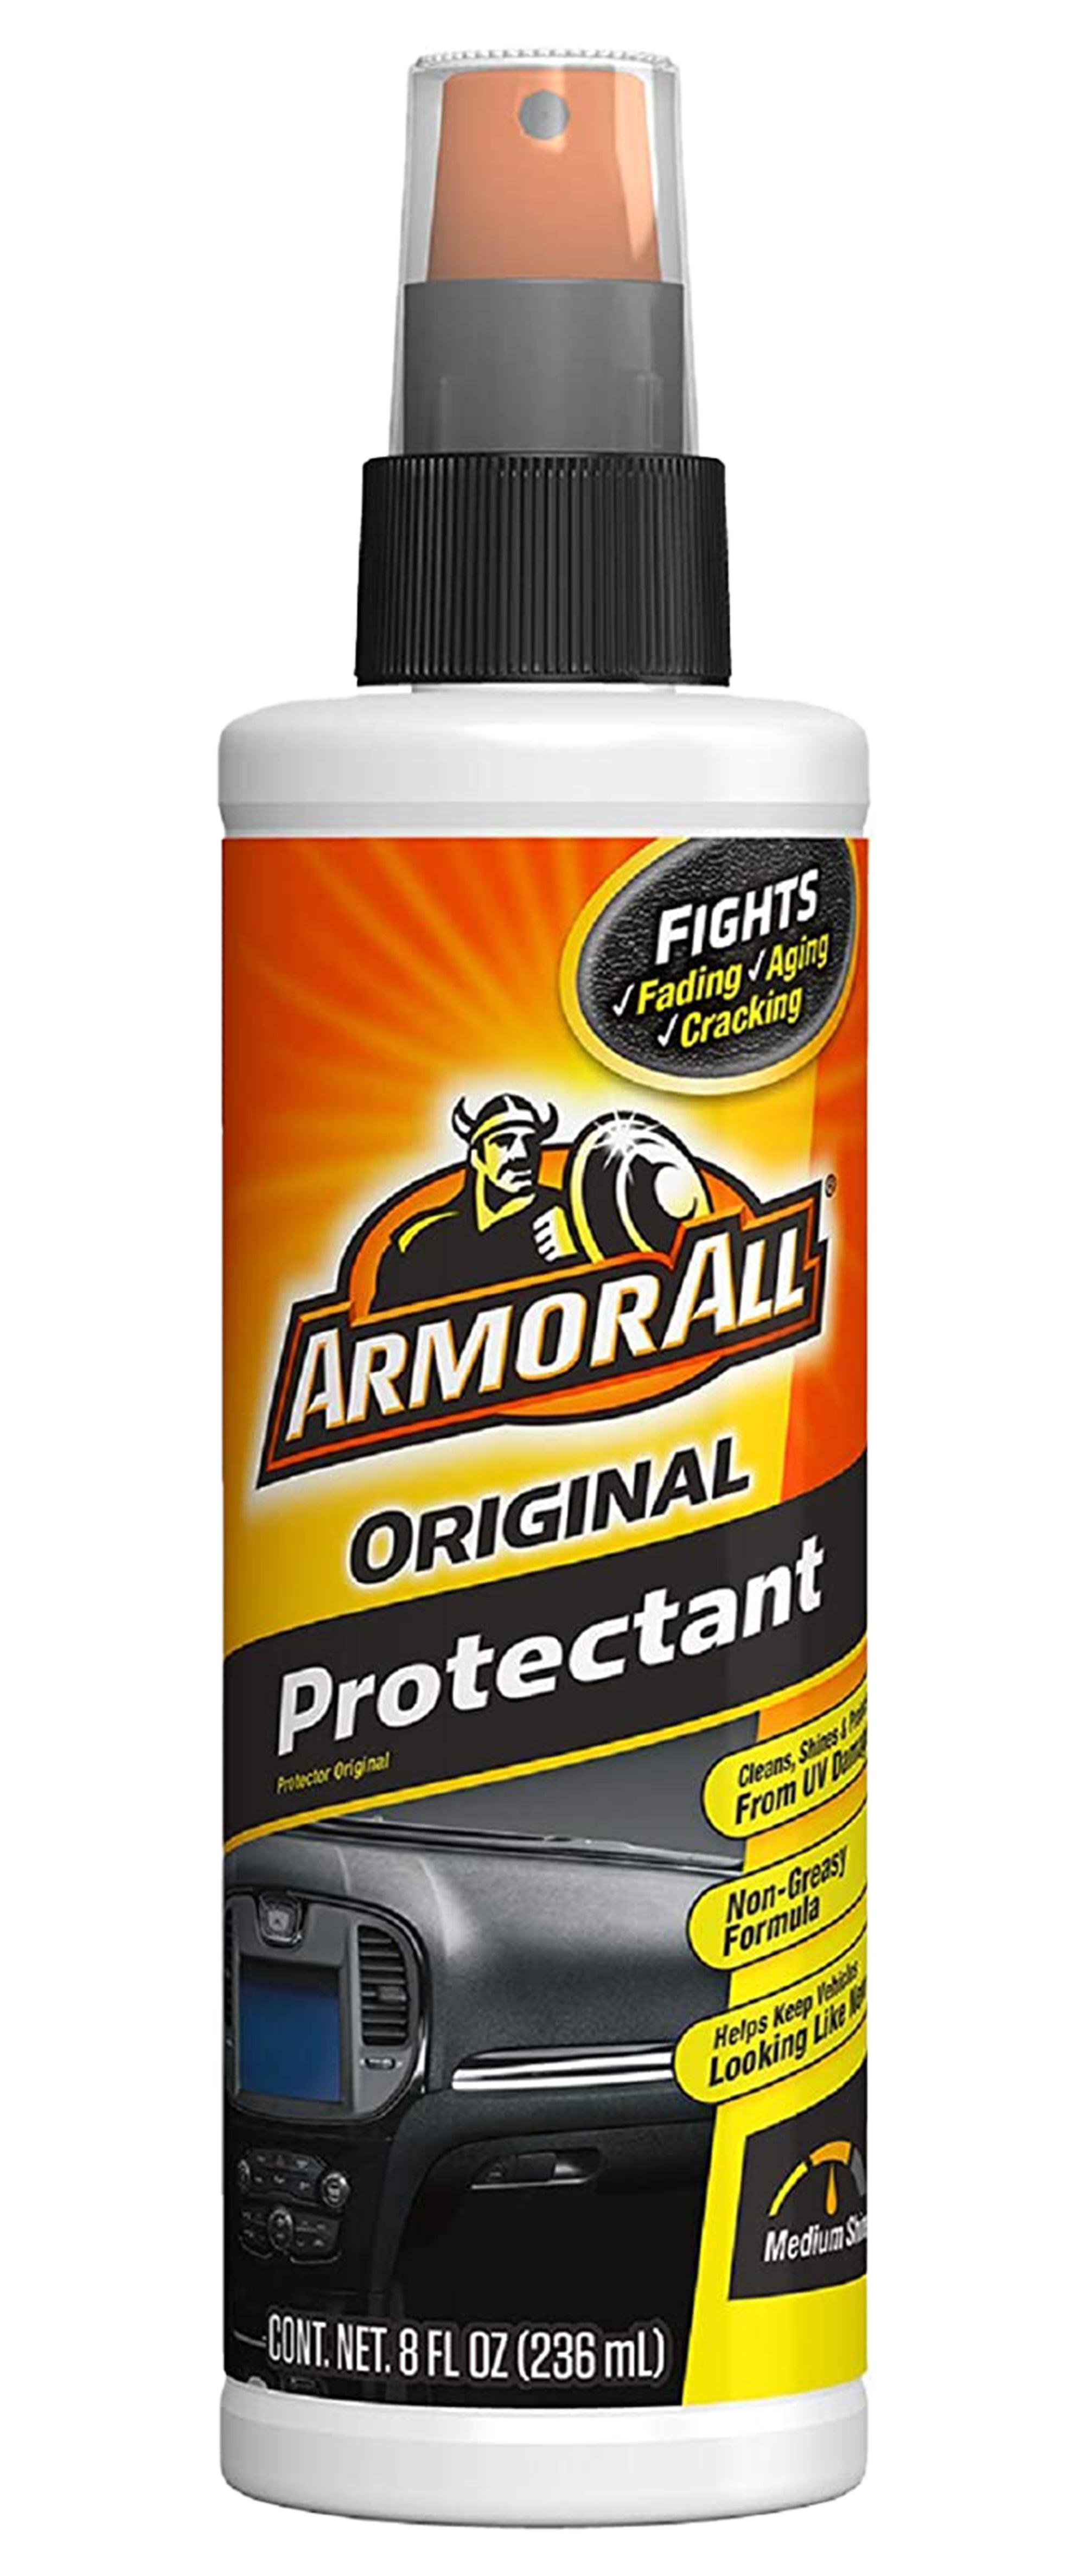  Armor All Original Protectant Spray by Armor All, Car Interior  Cleaner with UV Protection to Fight Cracking & Fading, 4 Oz : Automotive